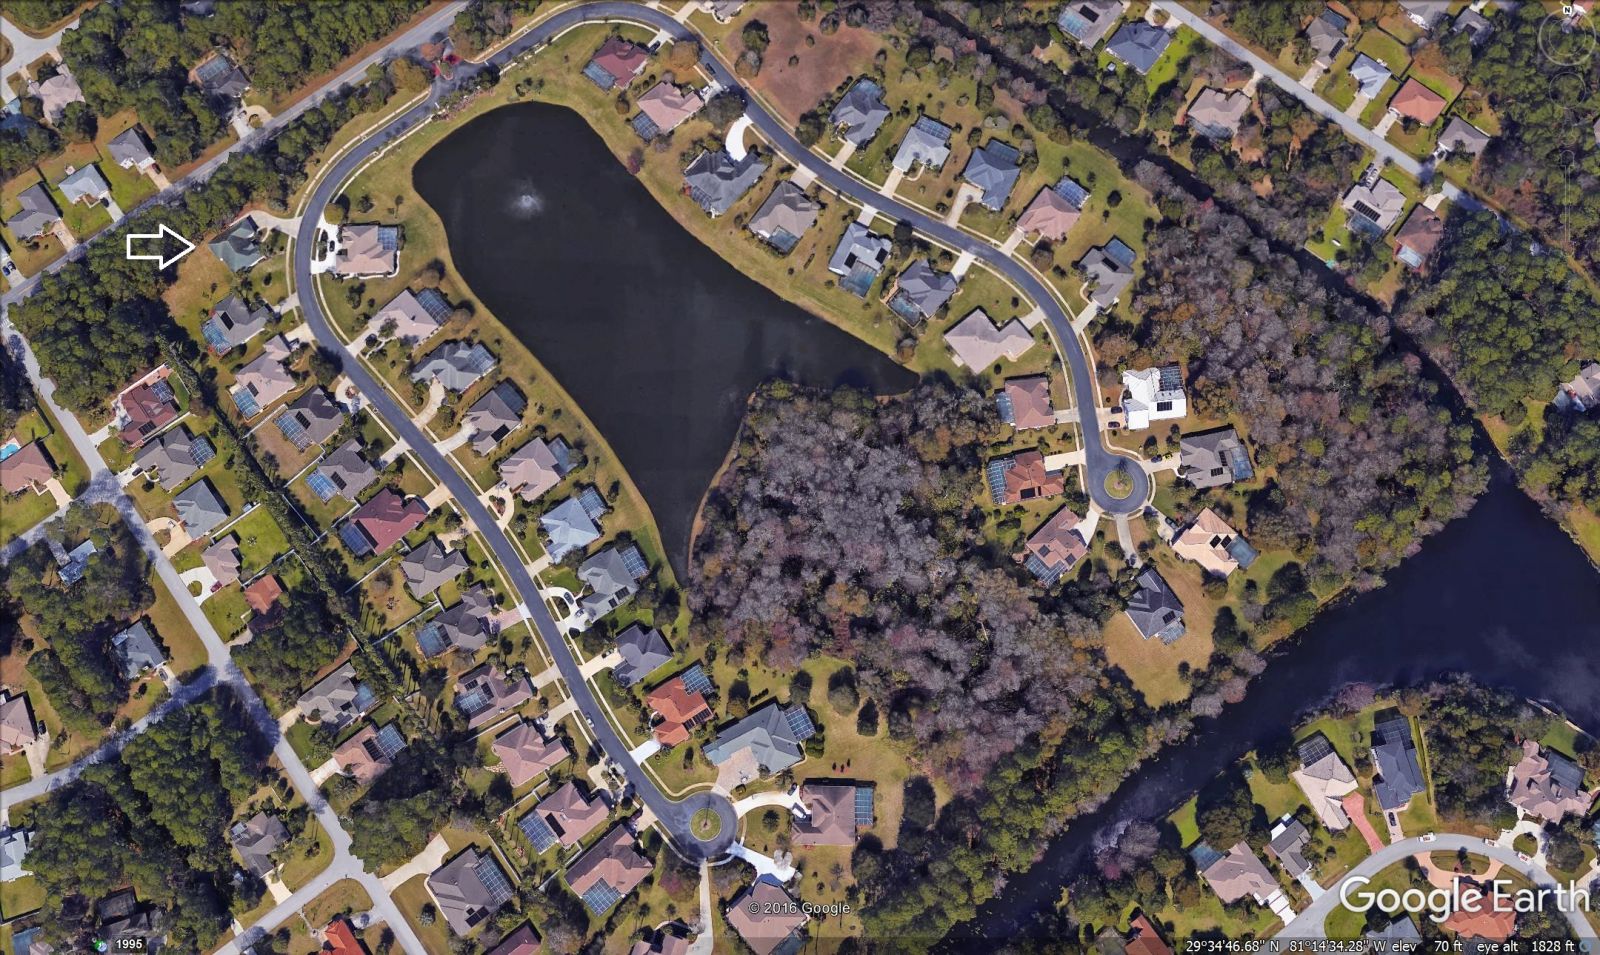 2 Lakeview Place in Palm Coast, FL - Google Earth